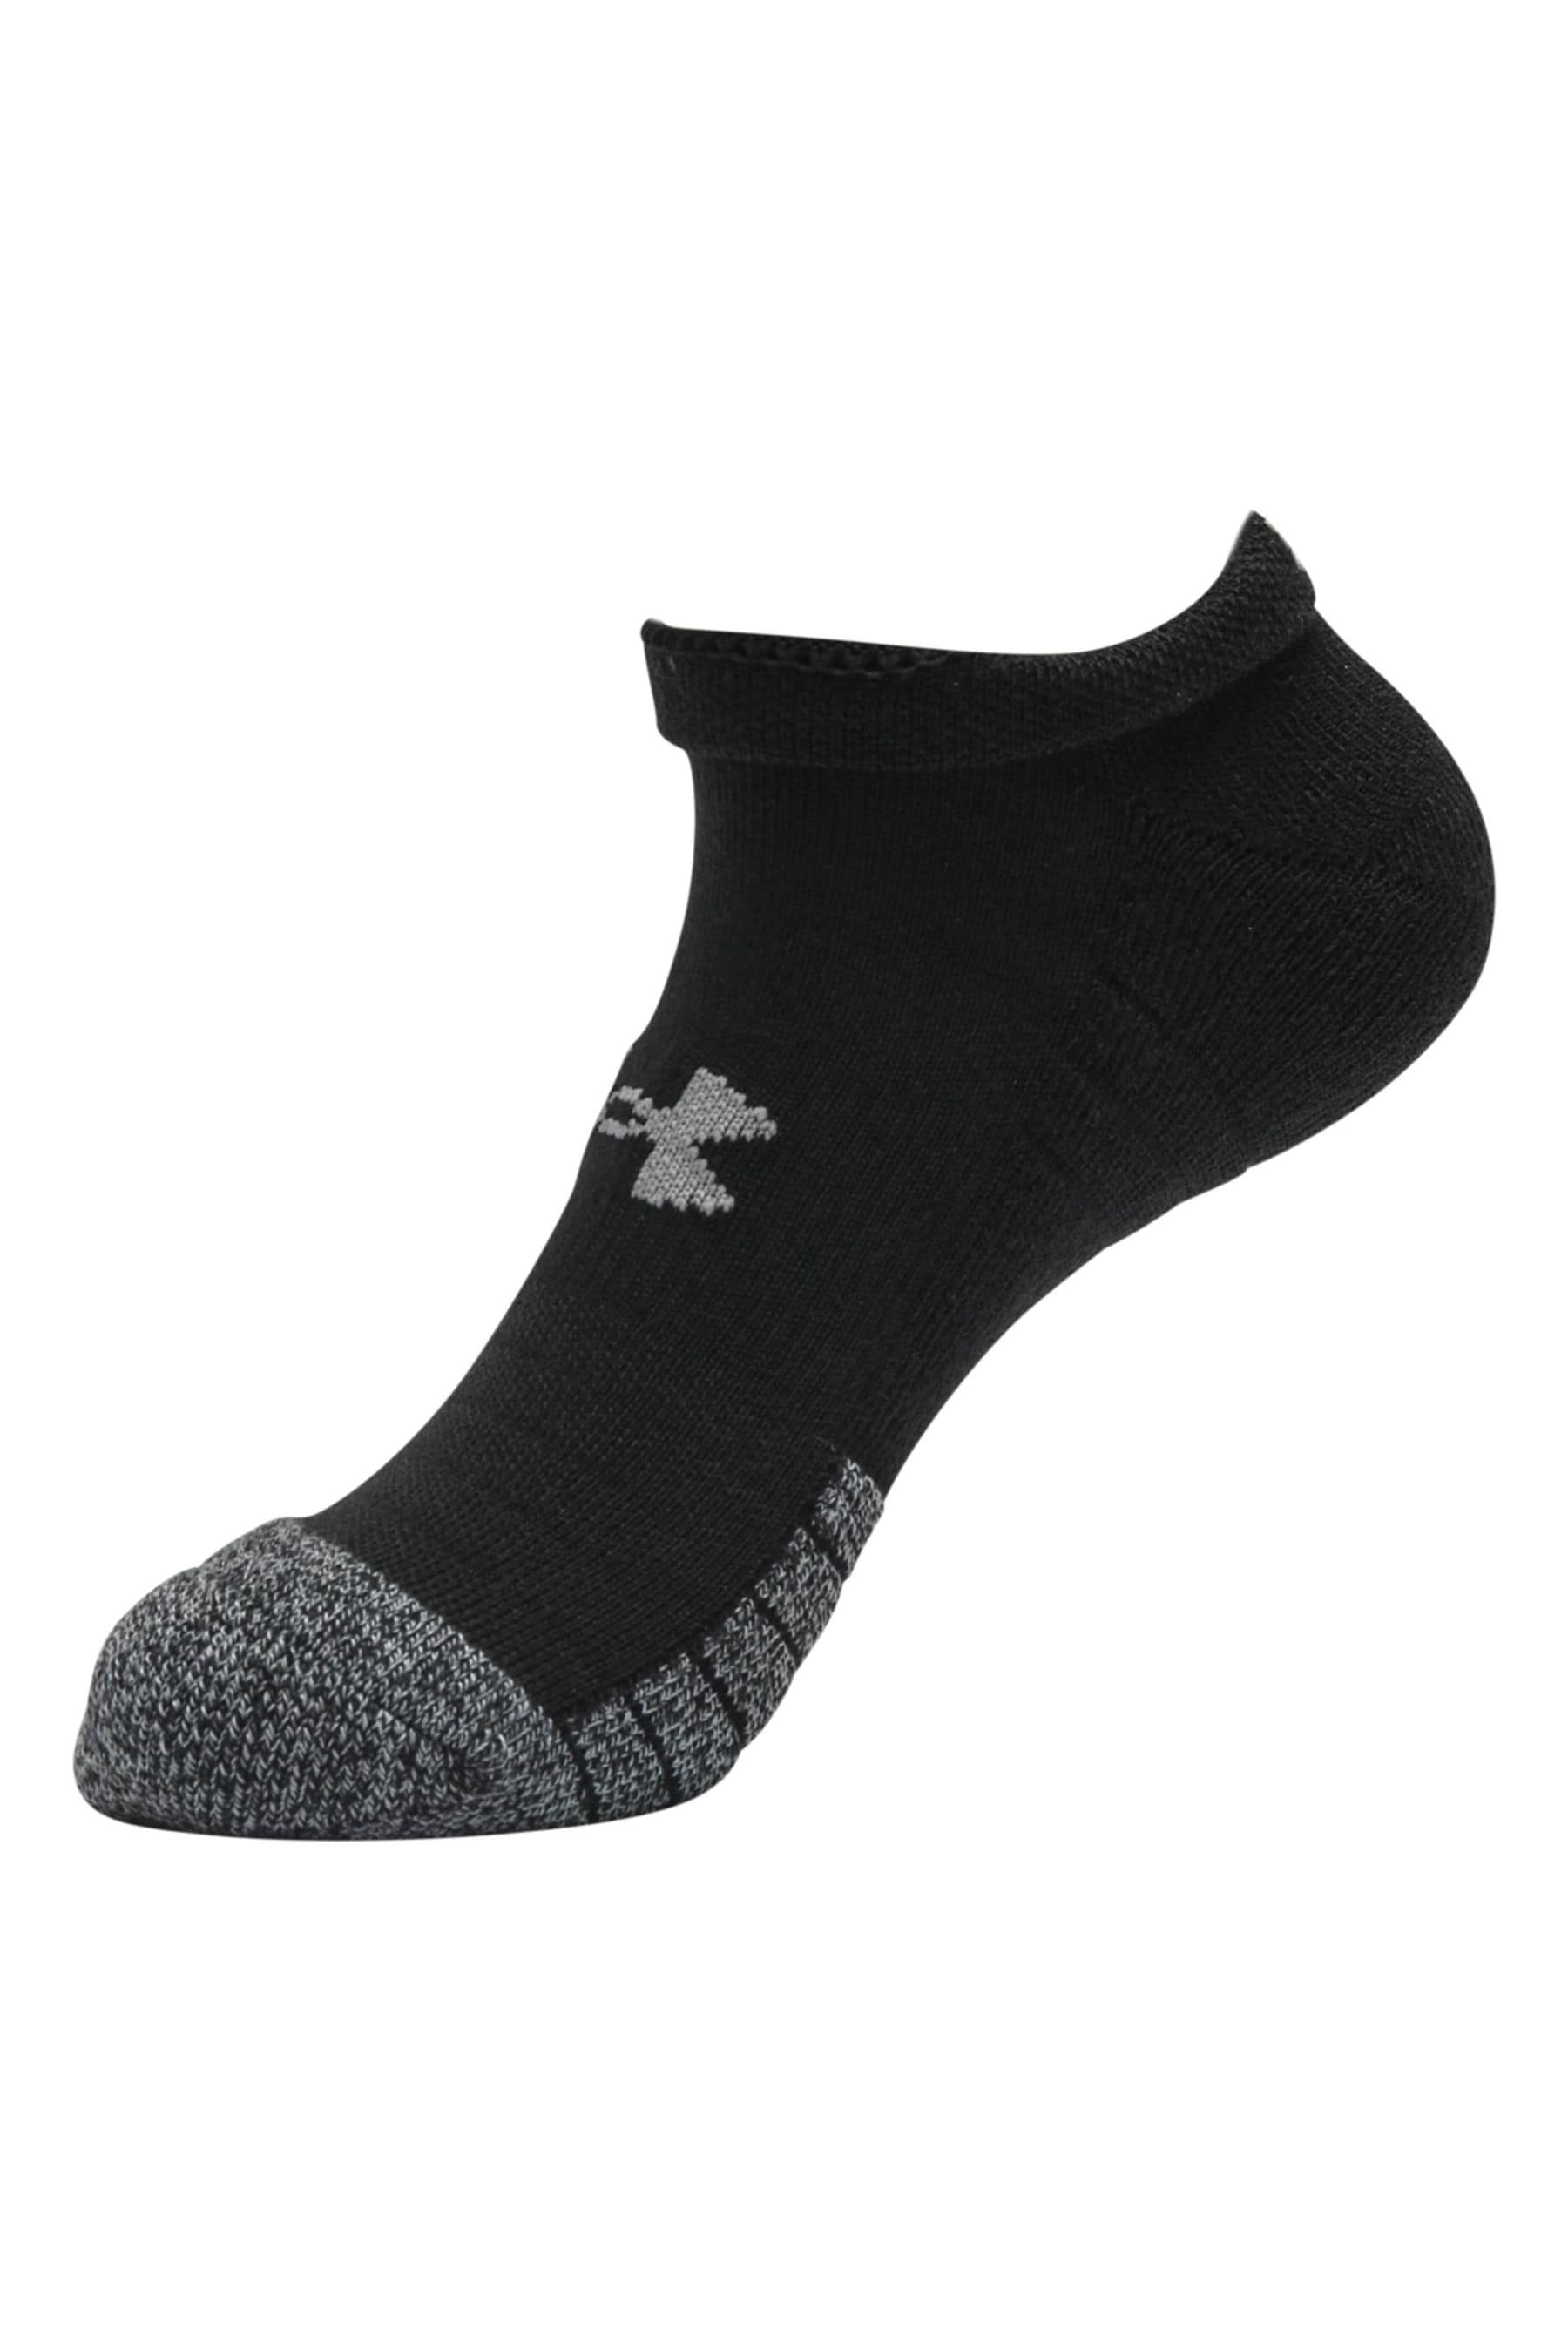 Buy Under Armour Black No Show Socks 3 Pack from the Next UK online shop